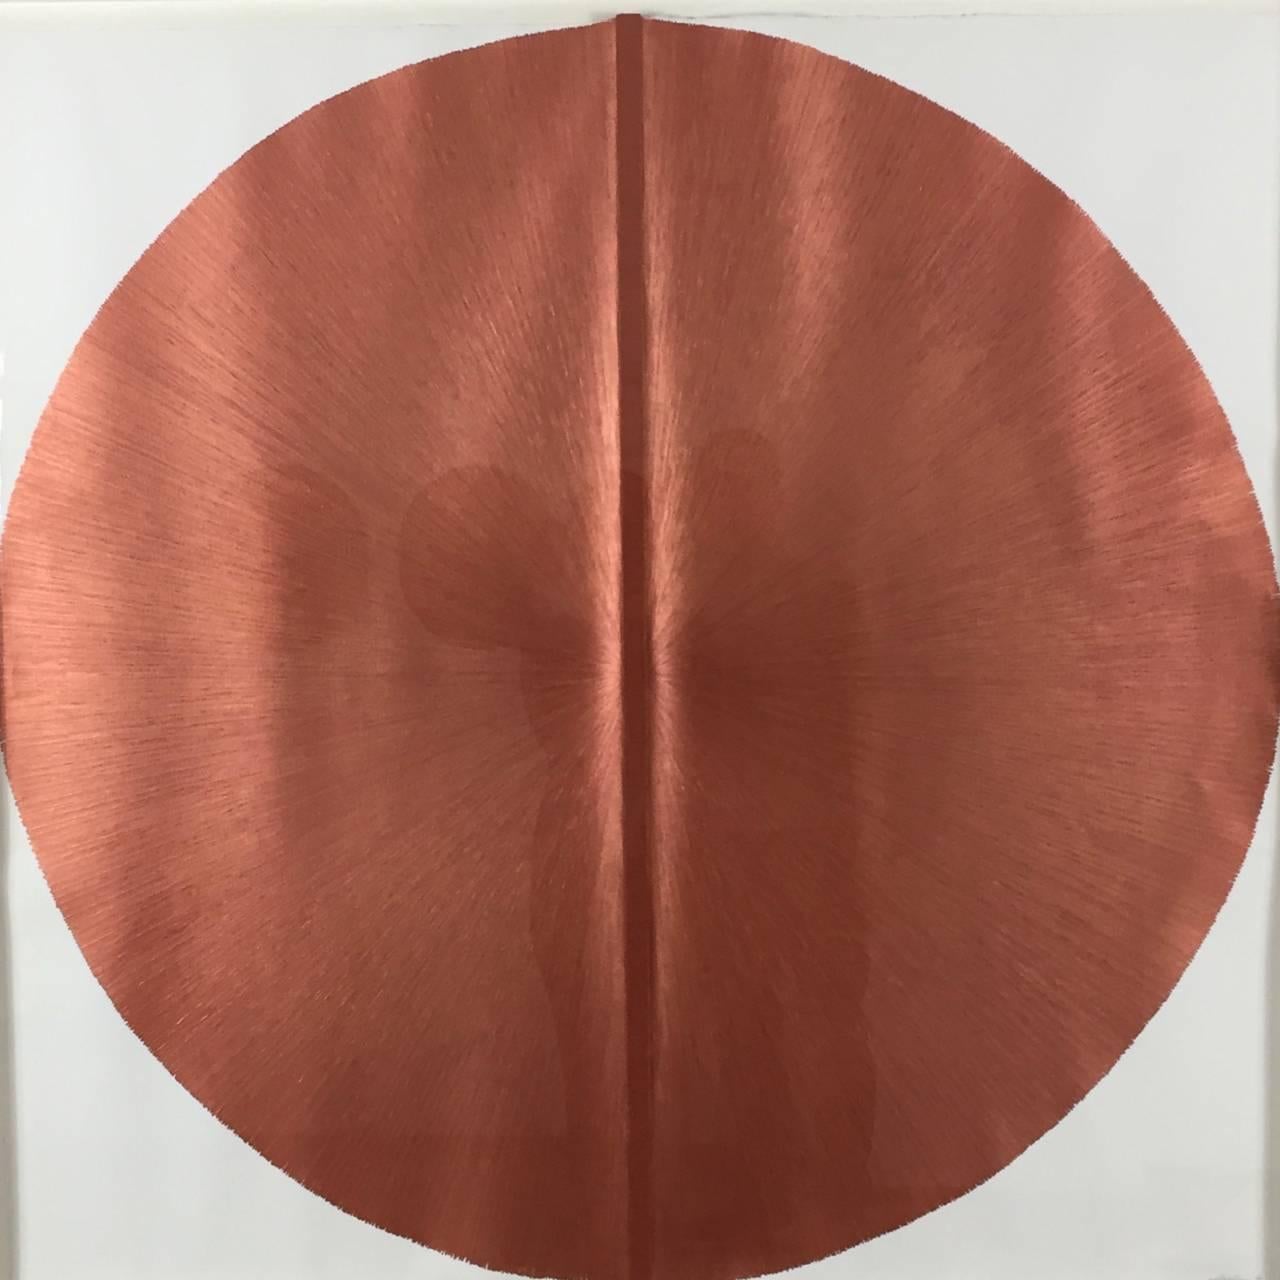 Solid Rod VI: Large, Metallic, Copper Painting by Established Spanish Artist (Braun), Abstract Painting, von Silvia Lerin